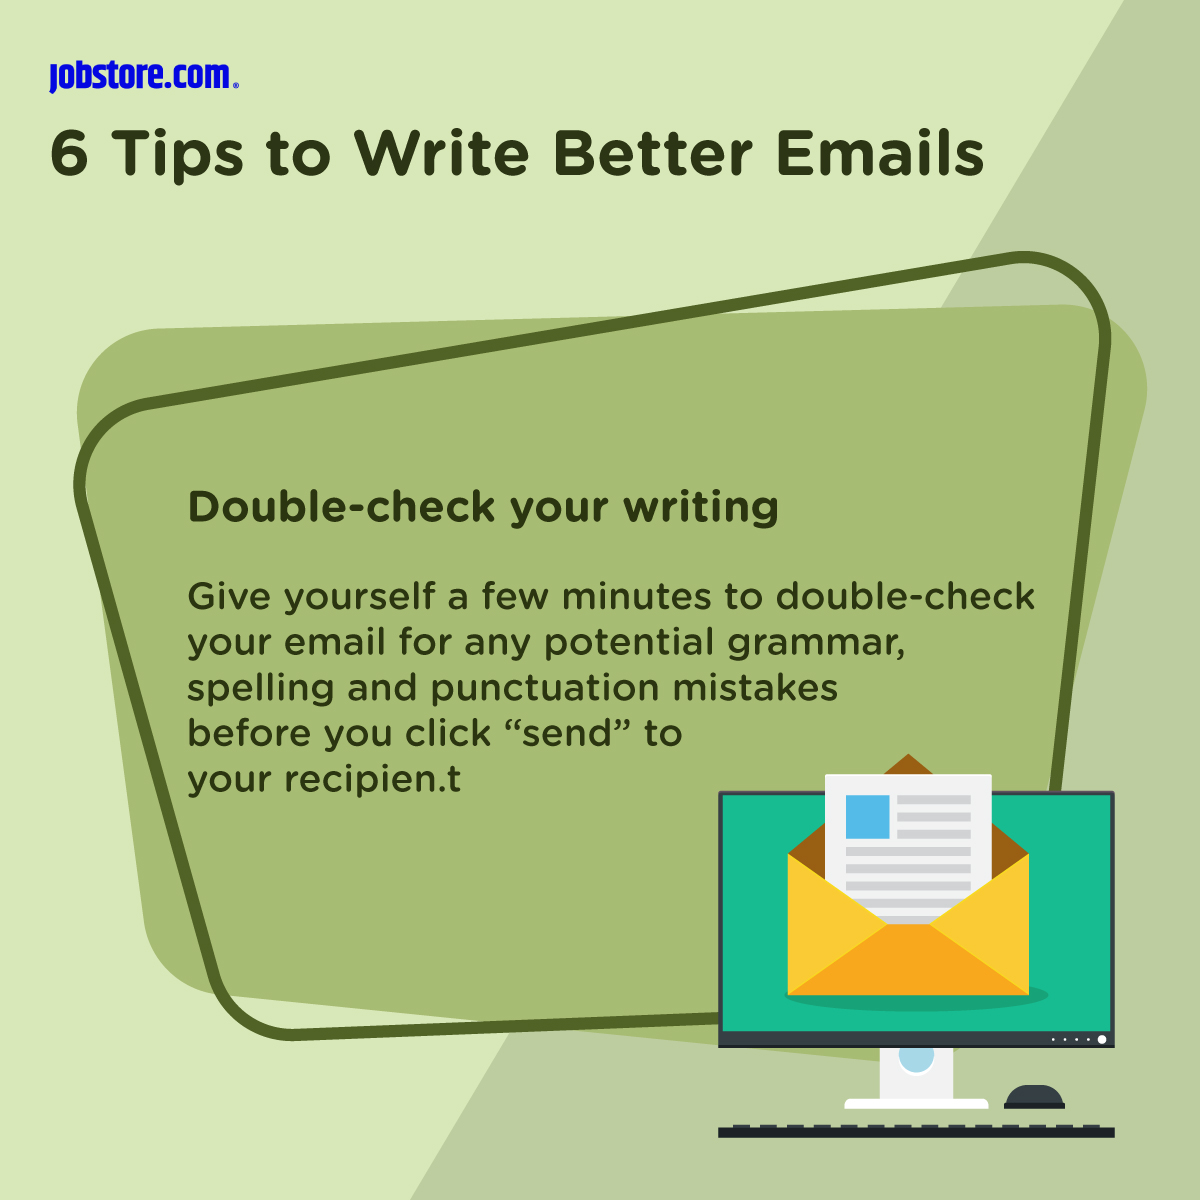 Follow these tips to improve your email writing talents to save time and improve communication skills.
Read more 🔗: jobstore.com/careers-blog/2…

#Jobstore #Tips #EmailWriting #Email #JawatanKosong #KerjaKosong #KerjaKosongTerkini #KerjaKosongMalaysia #kerjakerjakerja